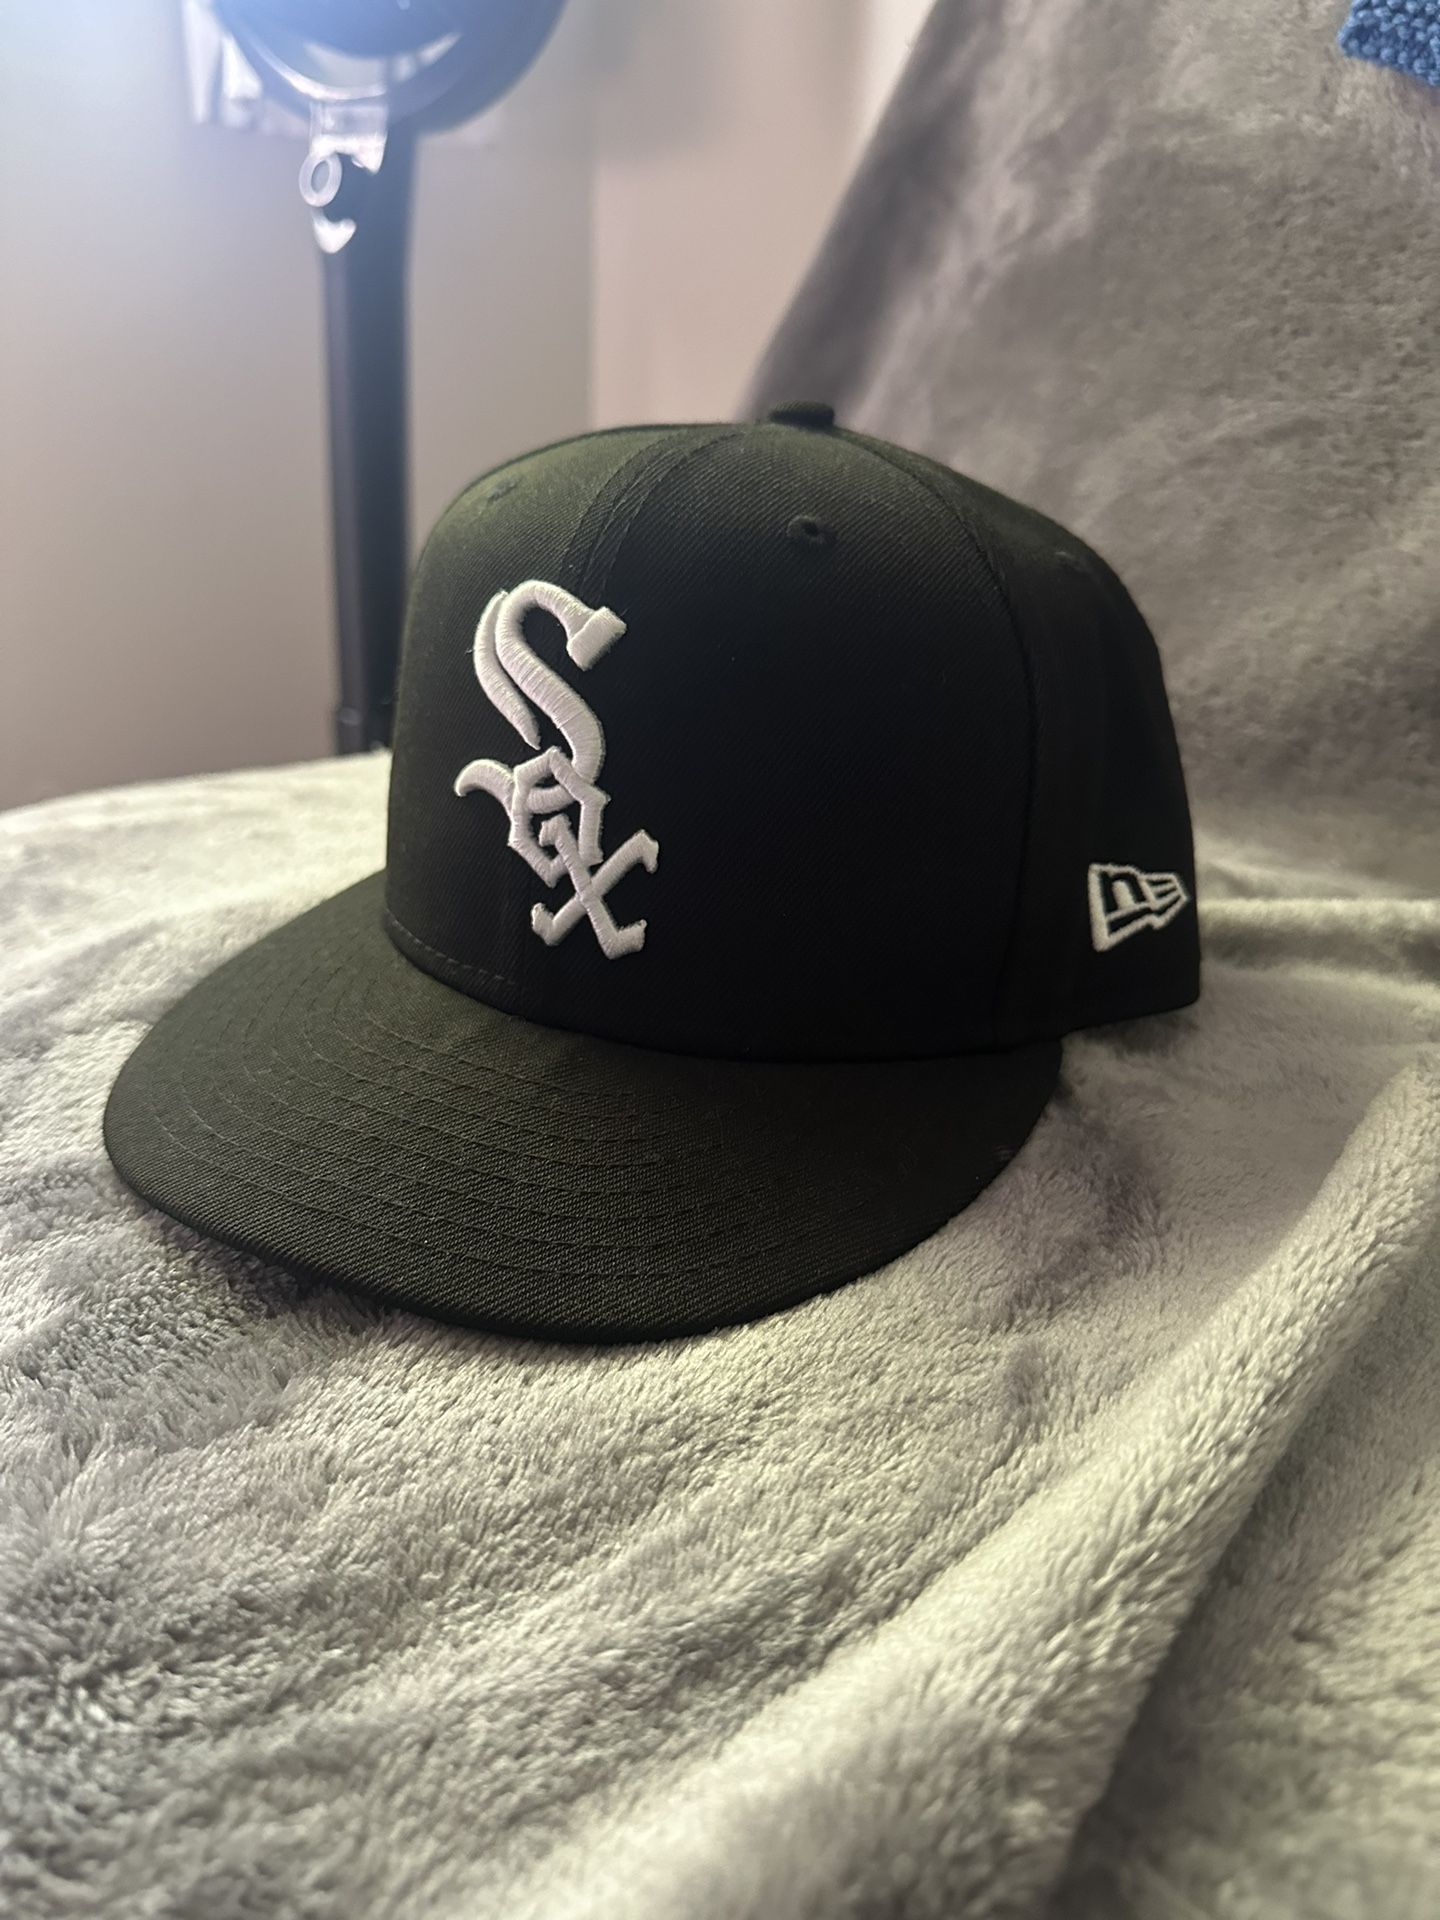 White Sox New Era Fitted Hat 7 1/4